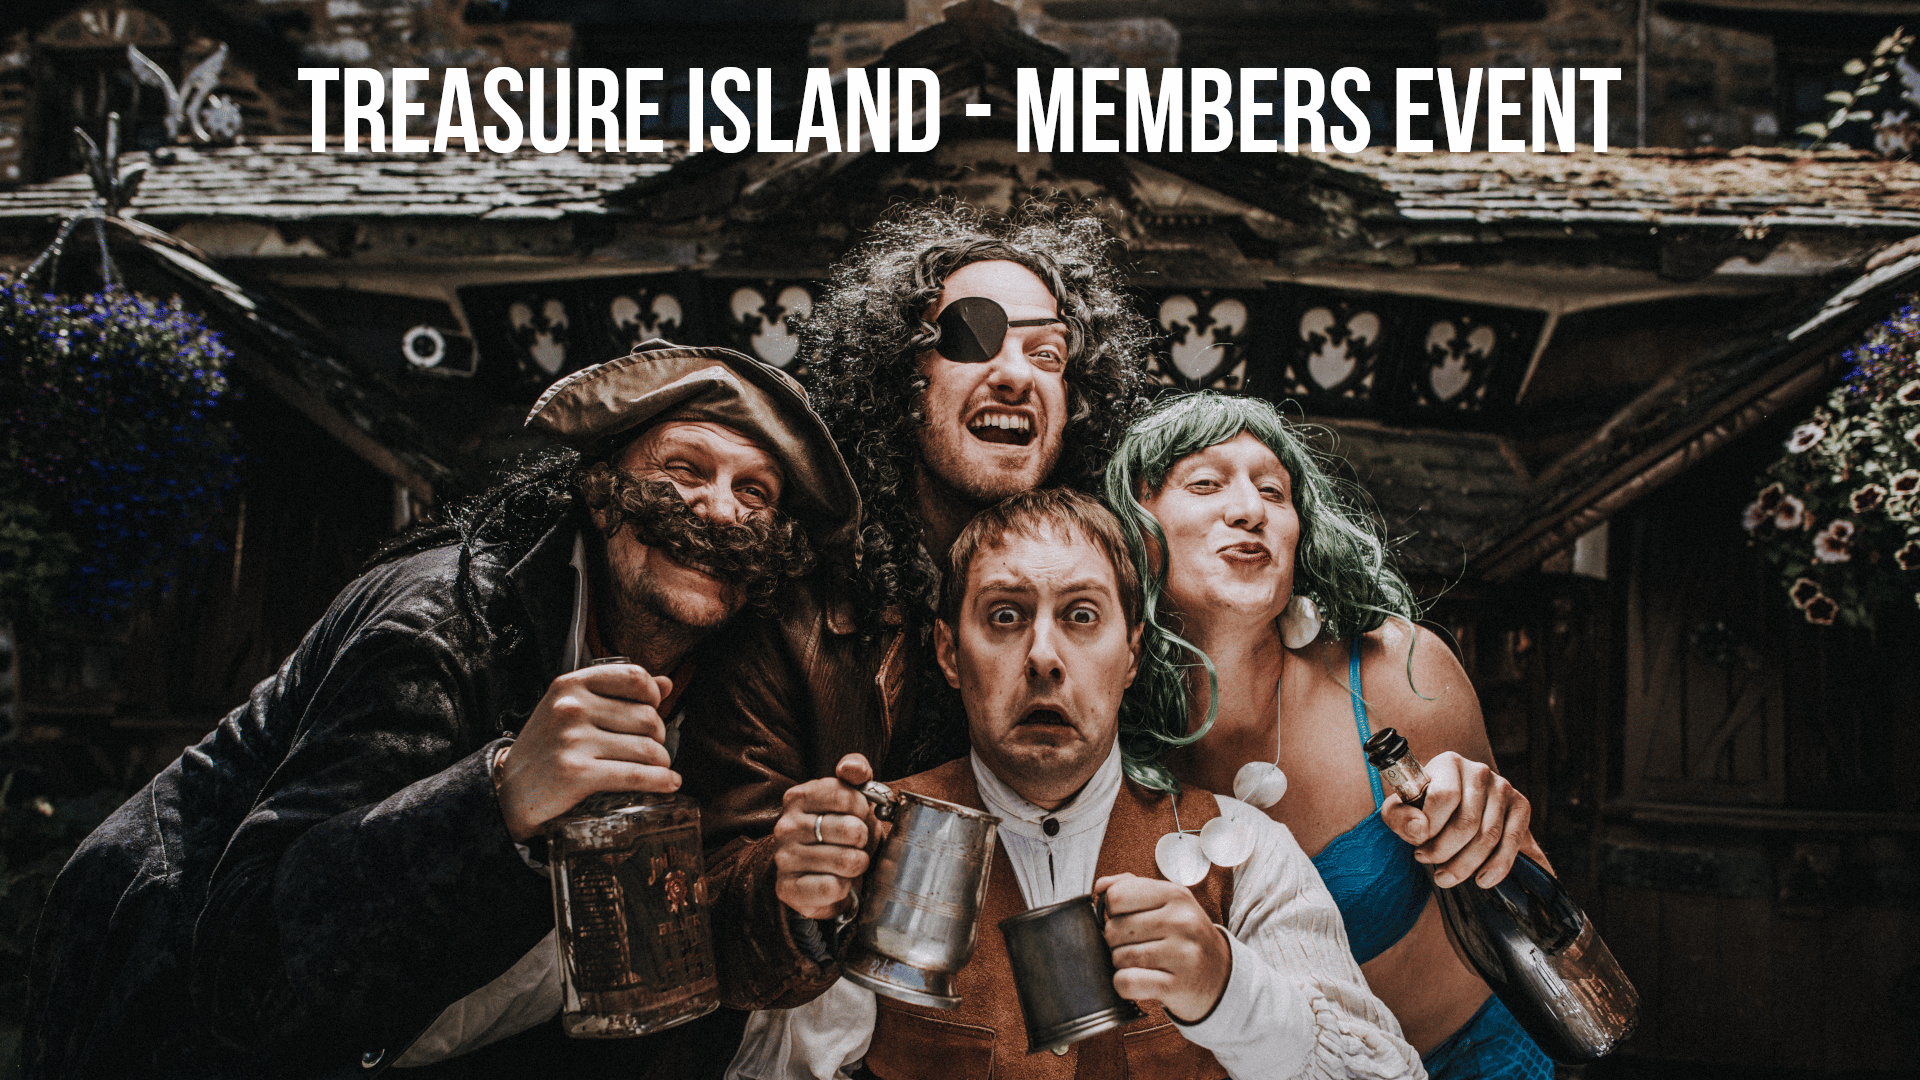 Treasure Island members event cover advert with cast members